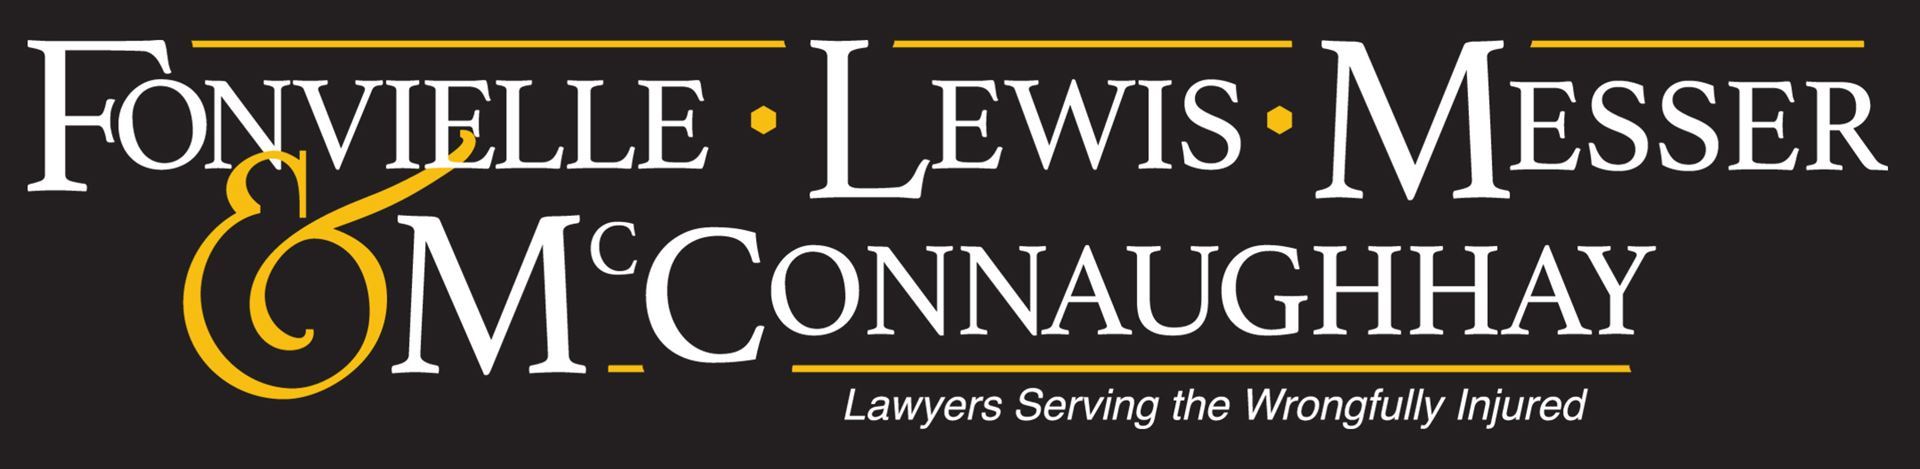 Fonvielle Lewis Messer McConnaughhay Lawyers Serving Wrongfully Injured logo